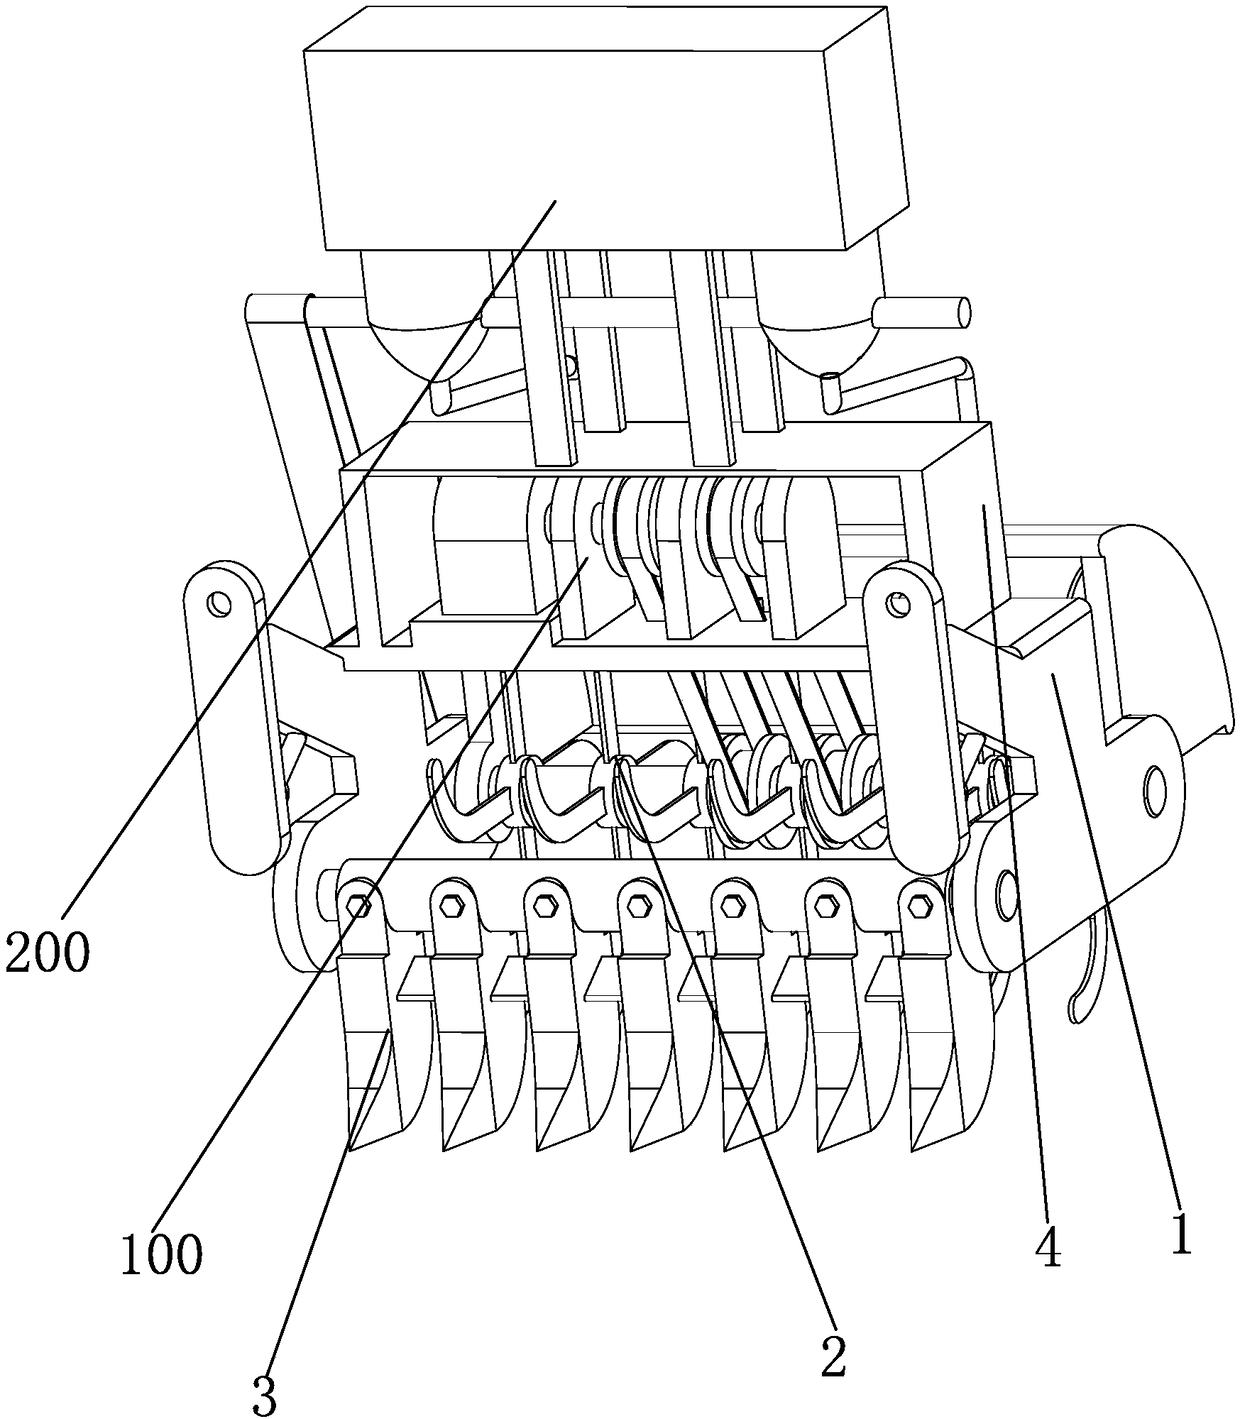 Loading machine soil loosening device equipped with sowing mechanism